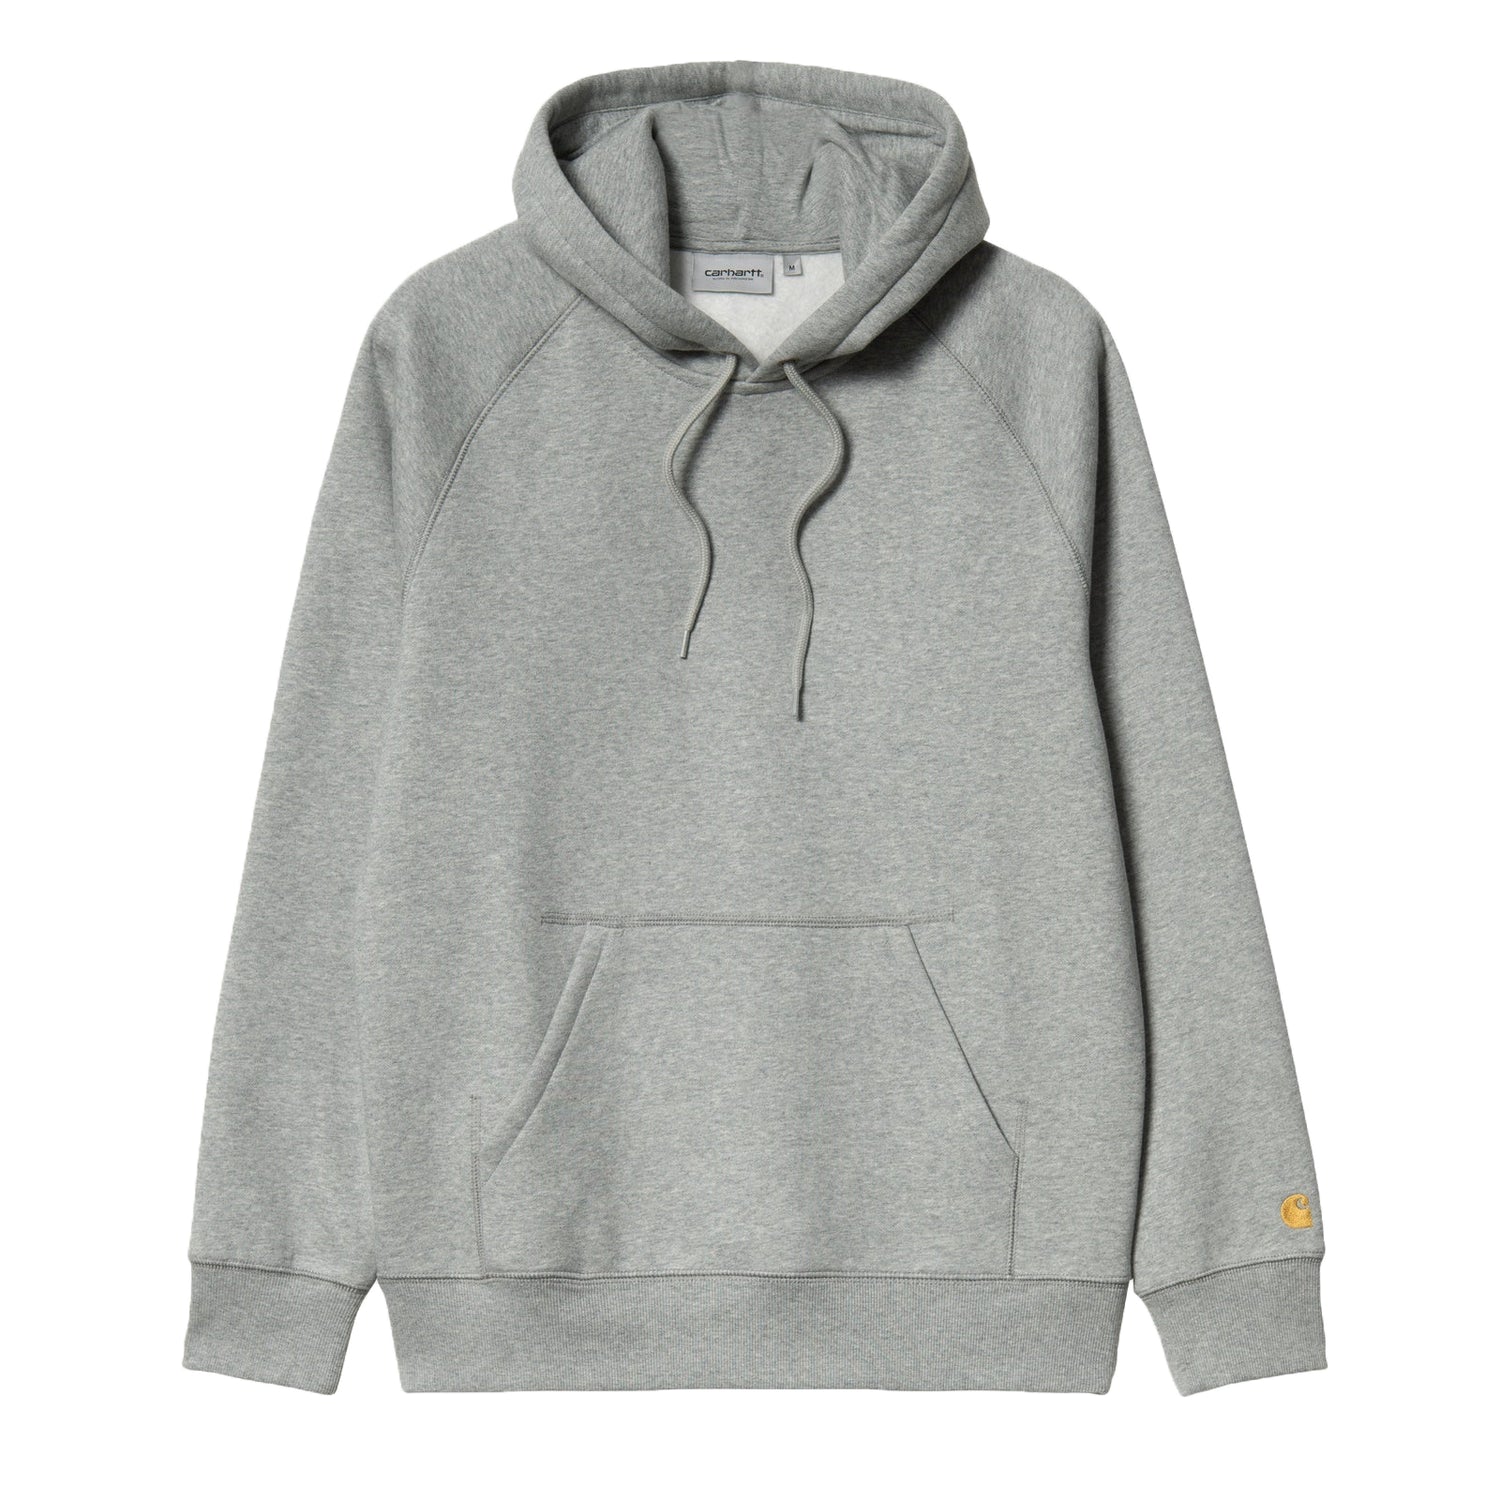 Chase Pullover, Grey Heather